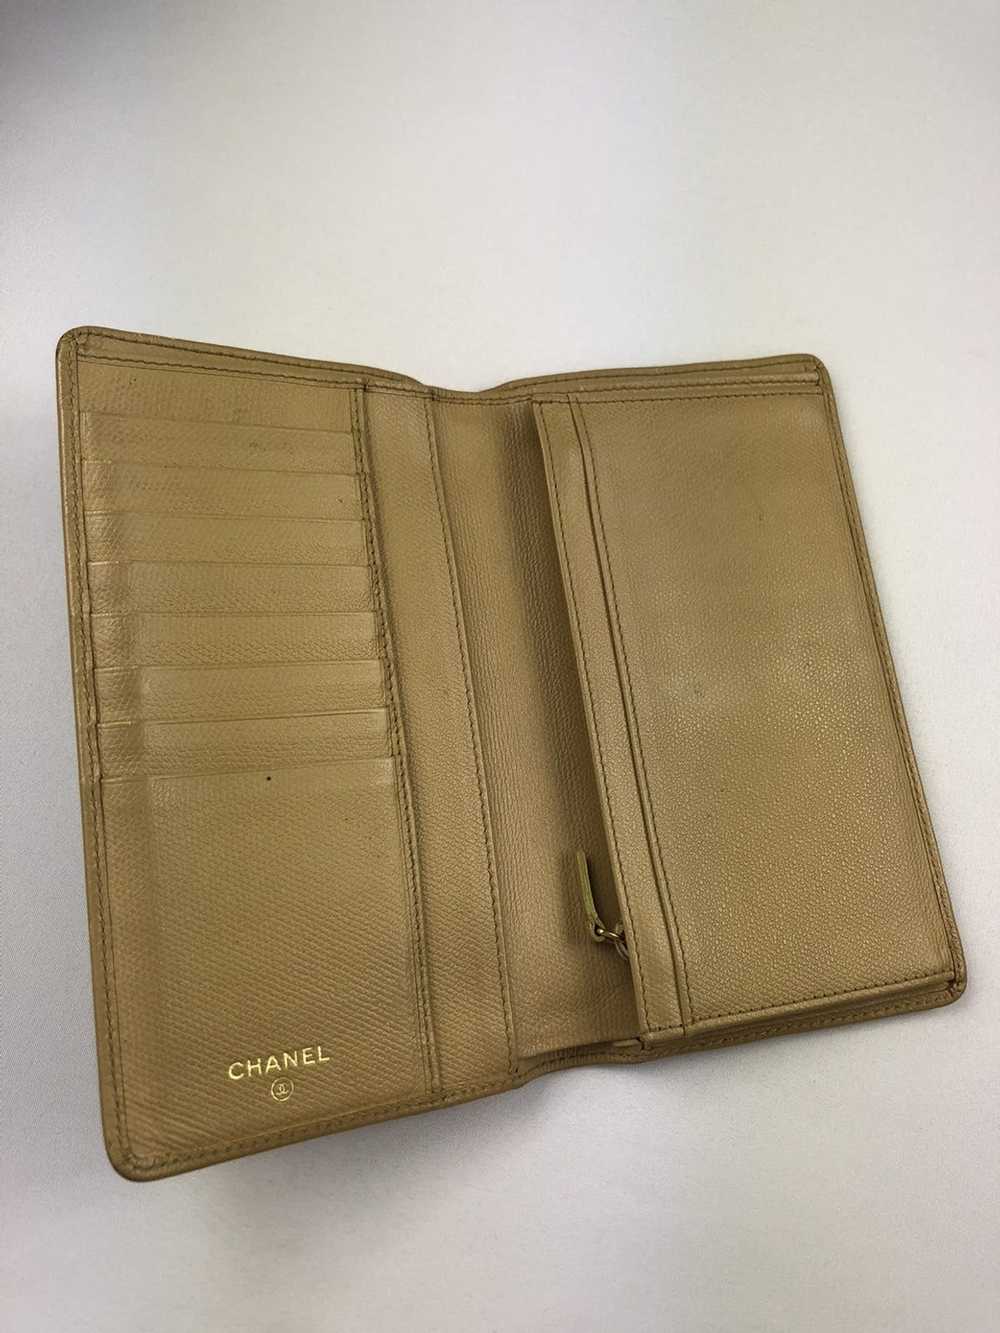 Chanel Chanel cc beige leather long wallet - image 3